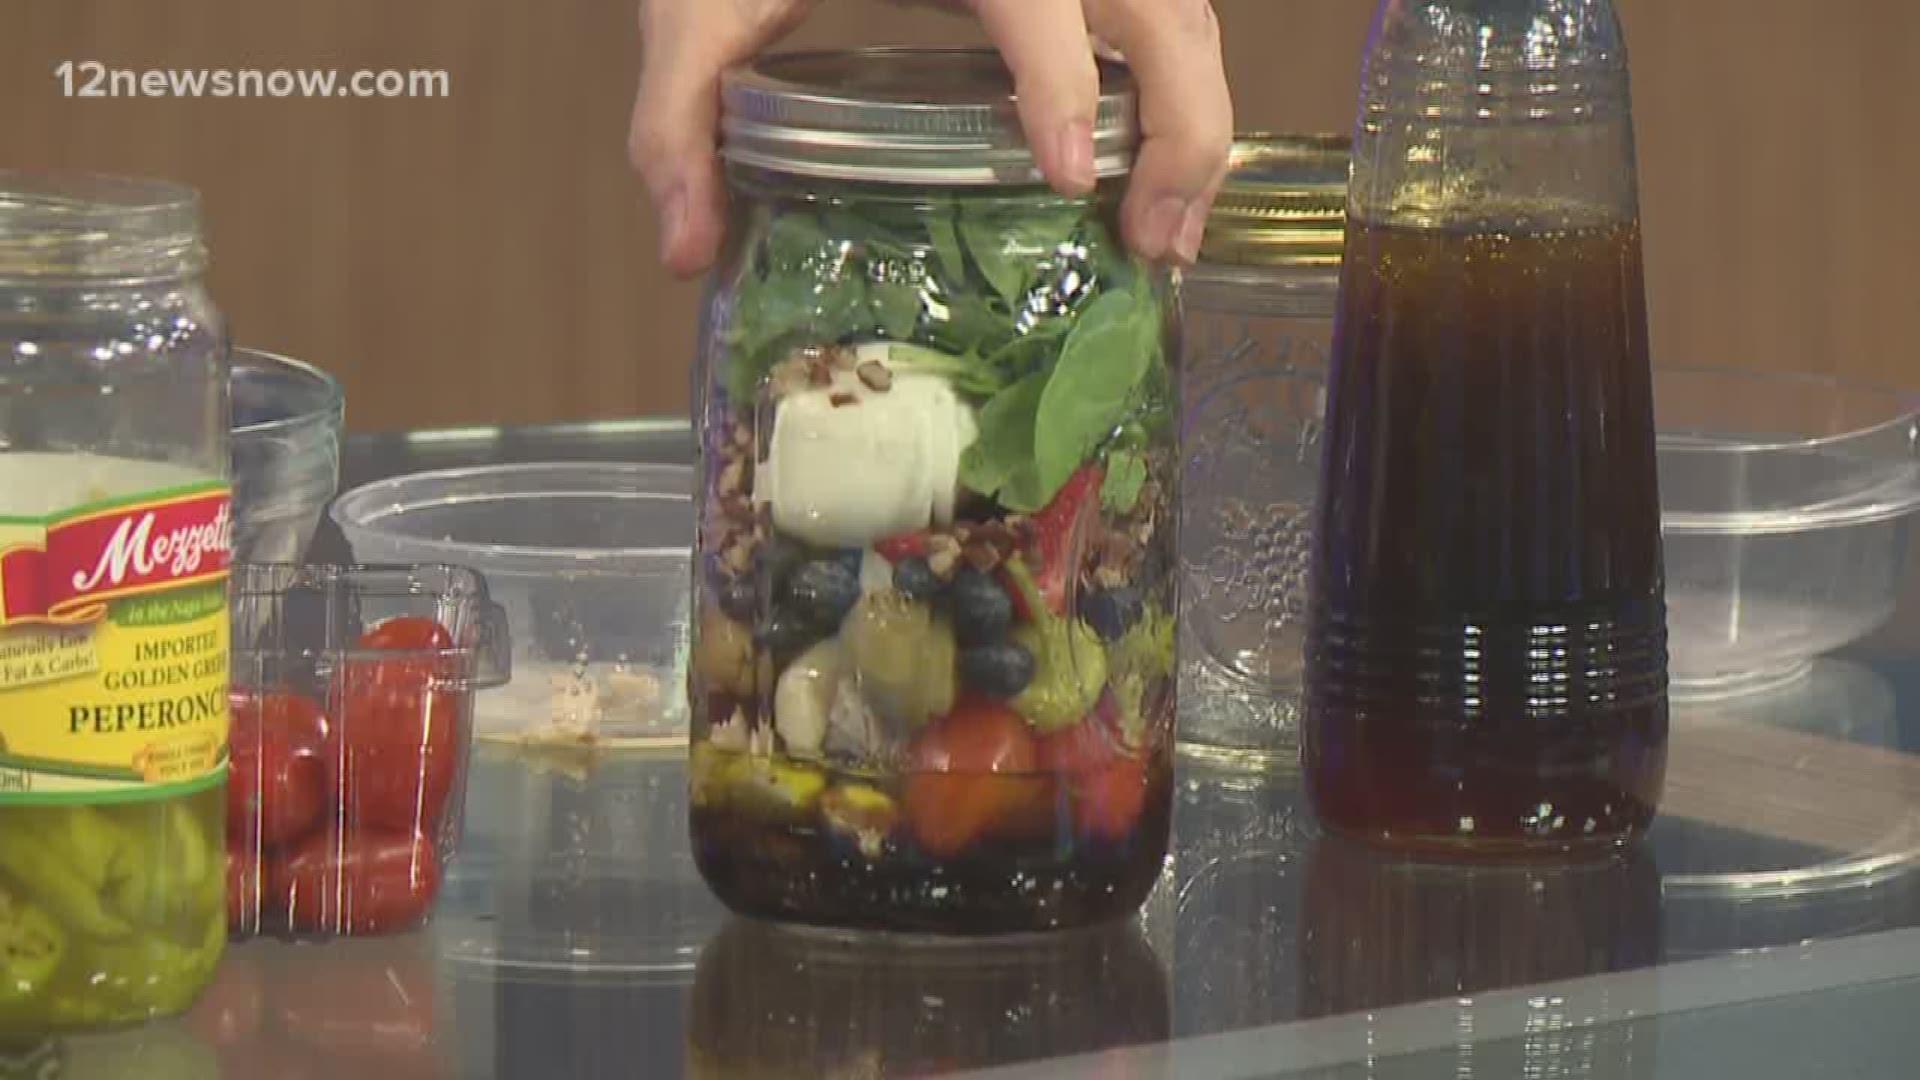 If you decide to make your salad in a jar, make sure to share it with us using #TheBeaton12.